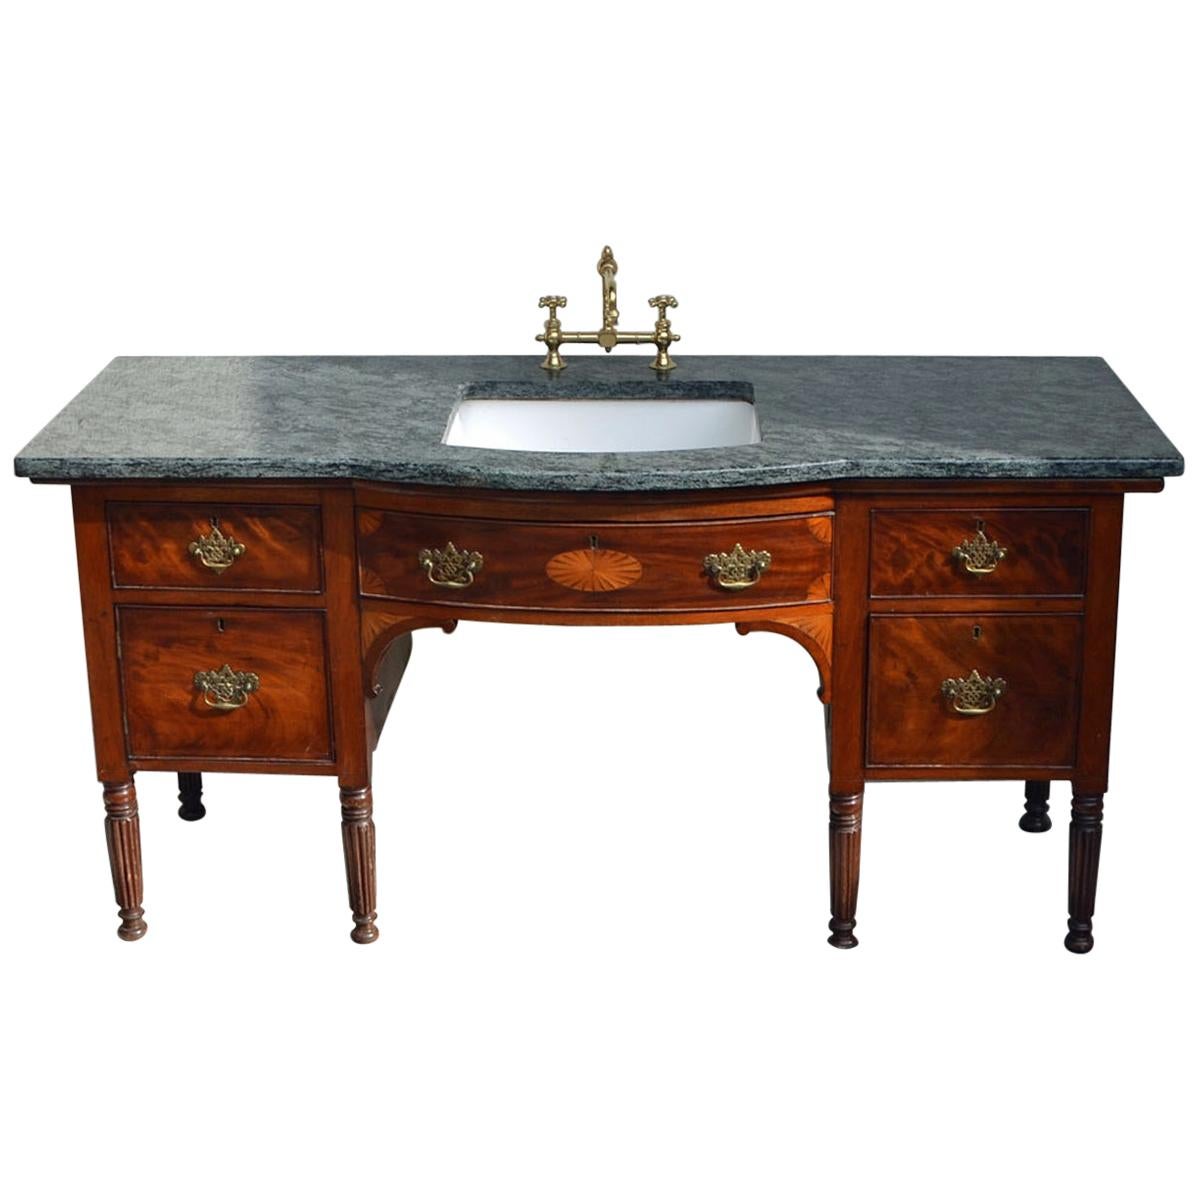 English Regency Sideboard in Mahogany from the 1830s, Converted to a Washstand